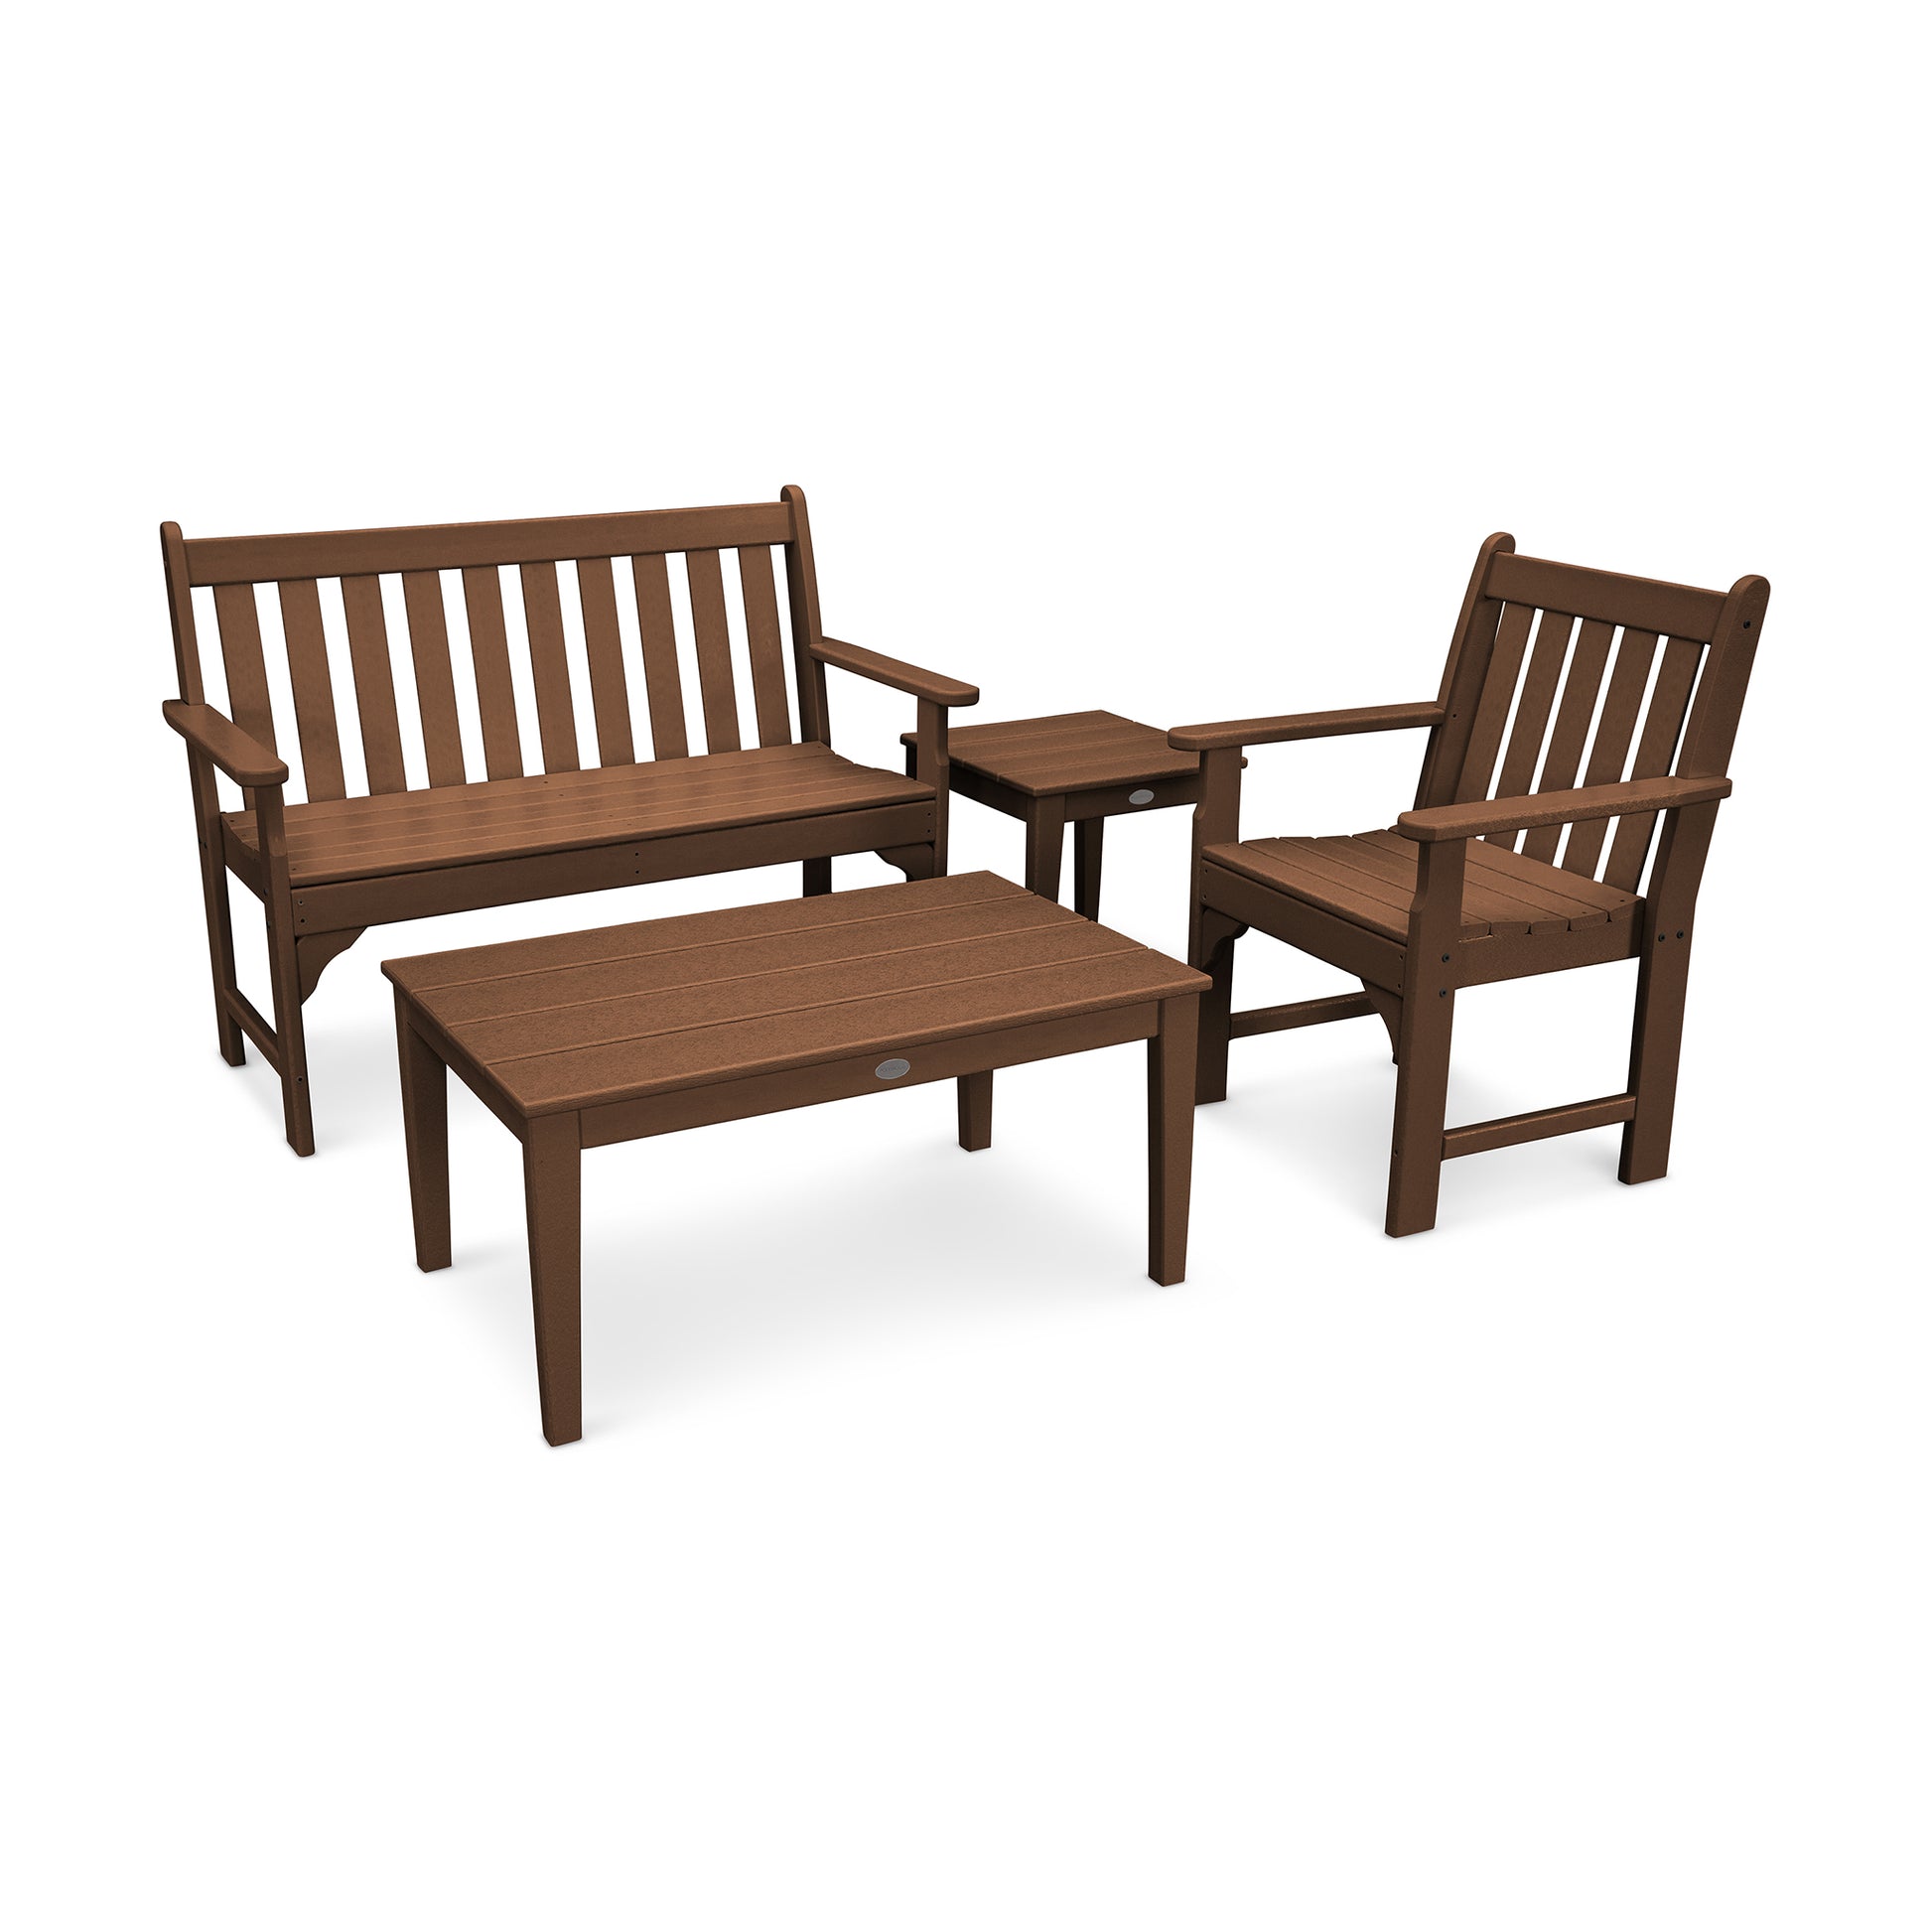 A POLYWOOD Vineyard 4-Piece Bench Seating Set featuring an eco-friendly POLYWOOD lumber with a brown slatted wood-style aesthetic, including two chairs connected by a small table, and a separate matching coffee table, on a plain